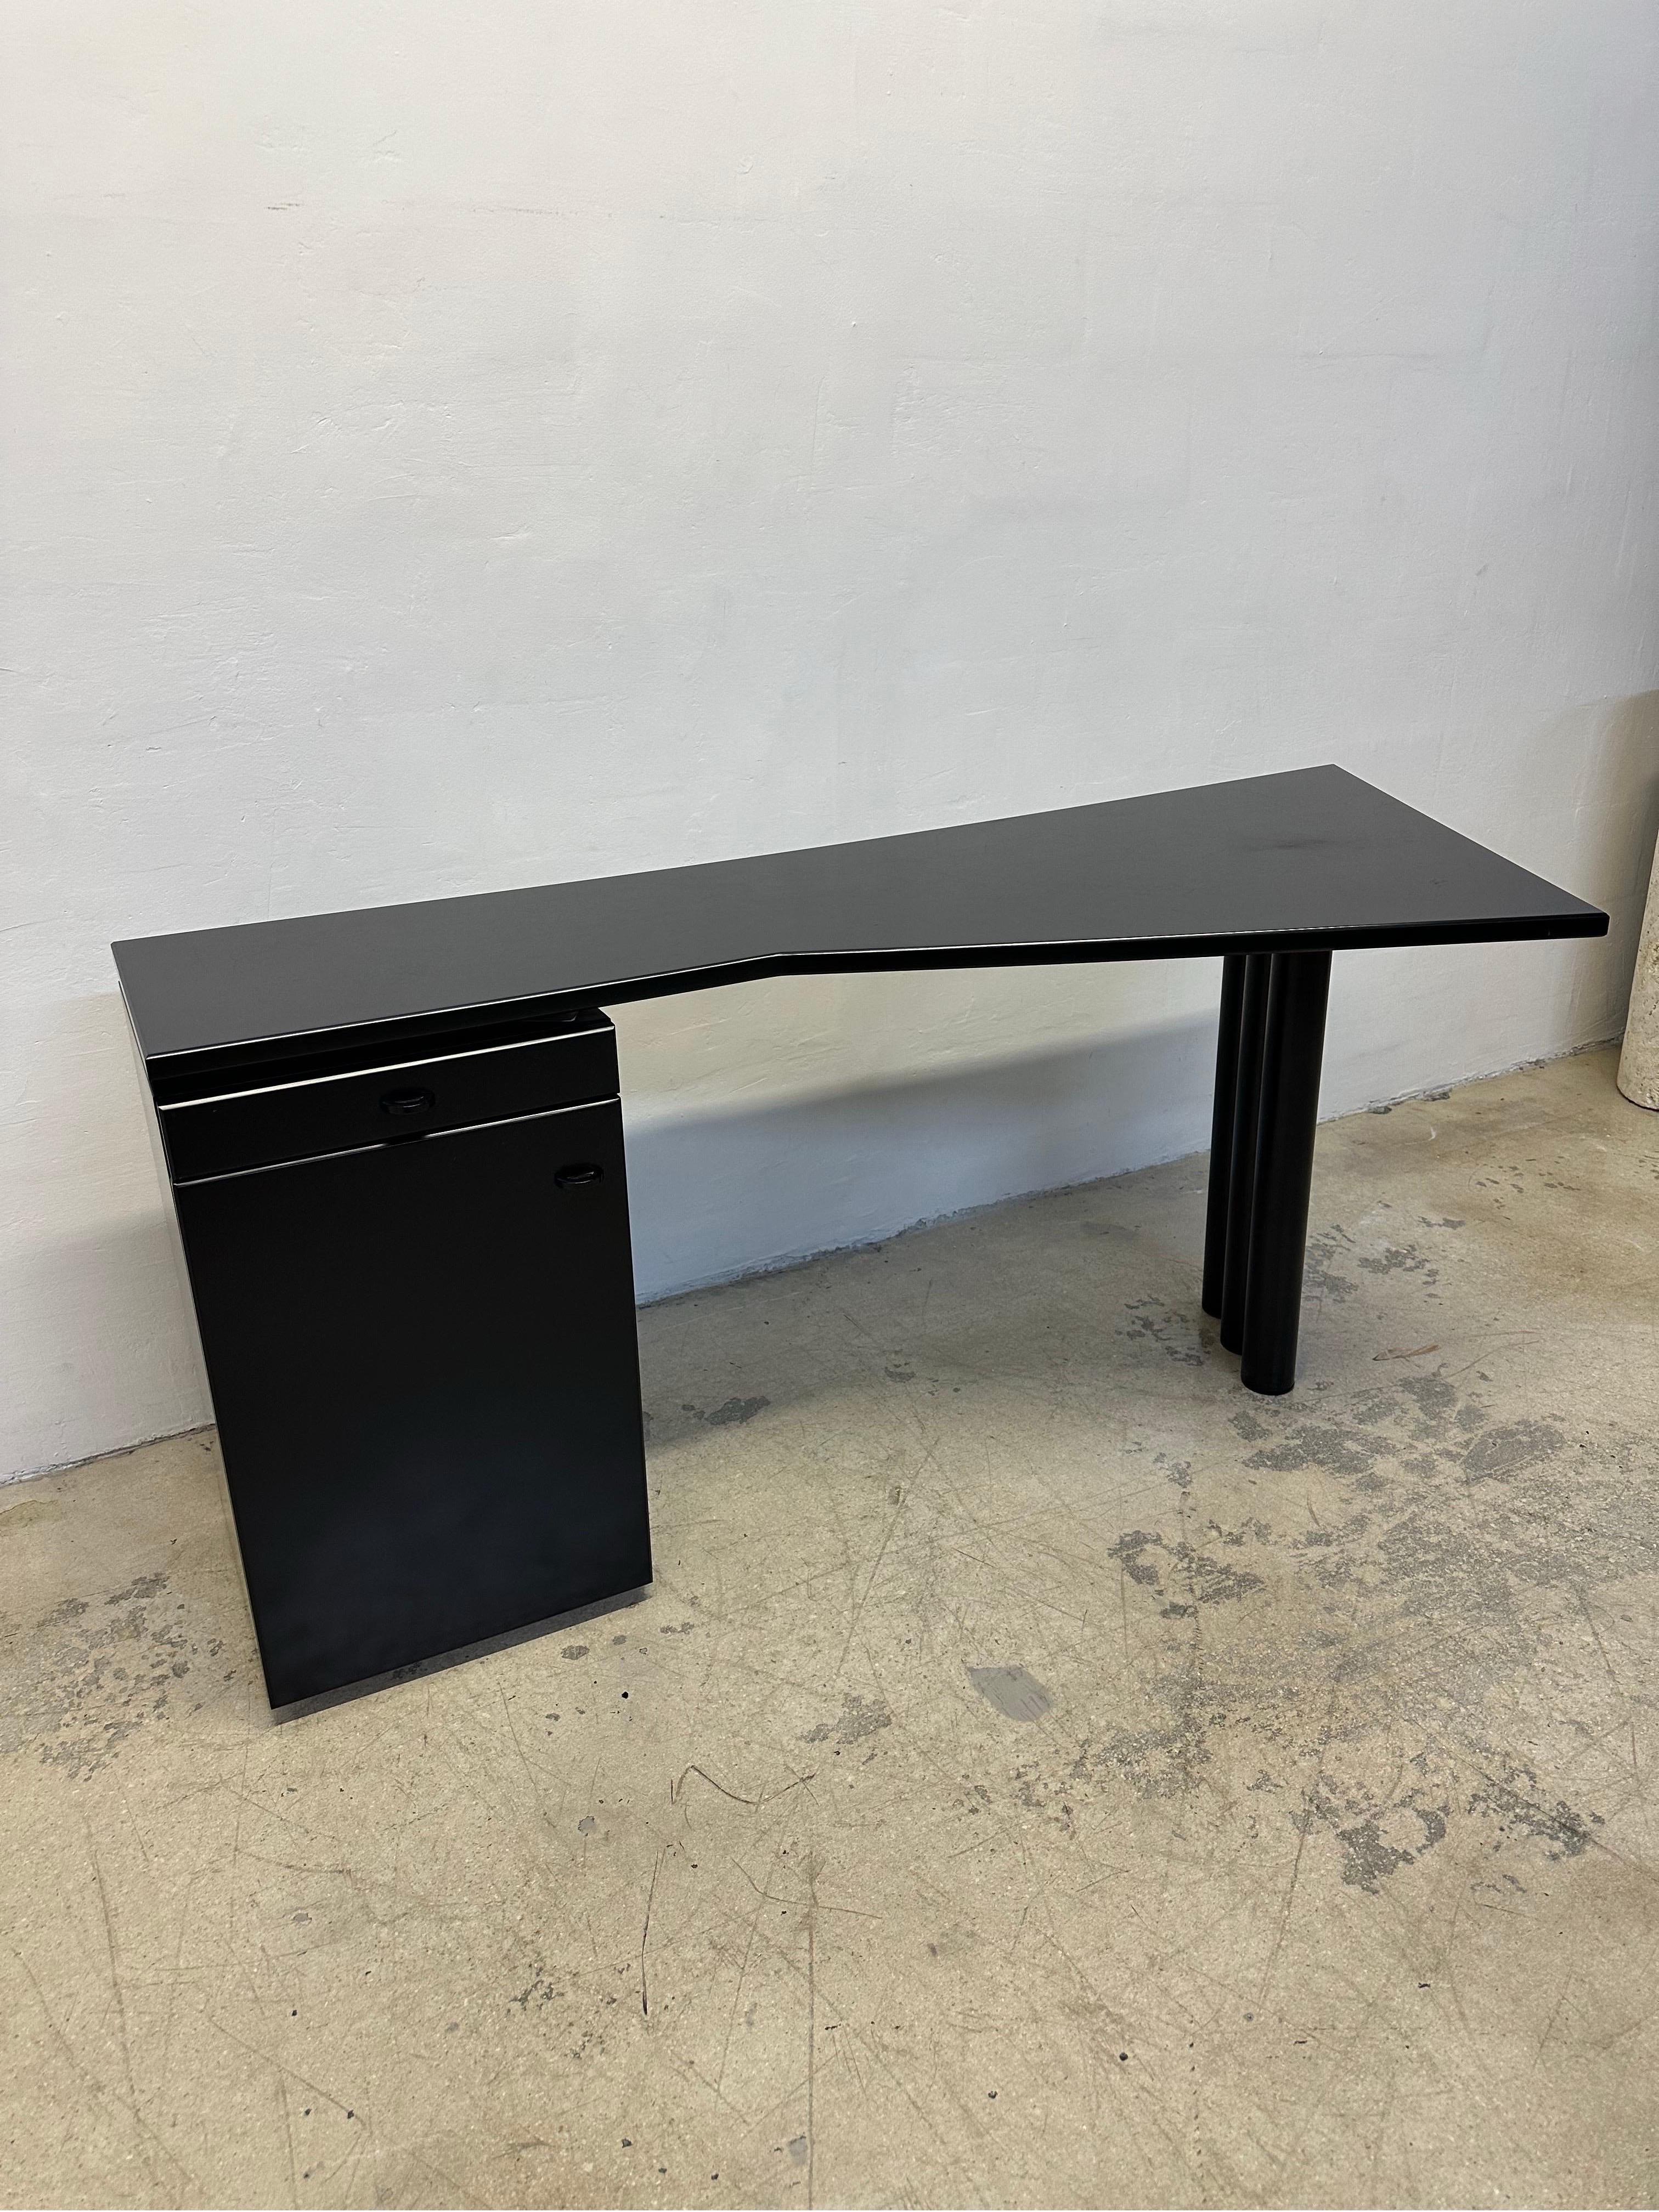 Postmodern Black Lacquered Desk by Interlubke, Germany 1980s In Good Condition For Sale In Miami, FL